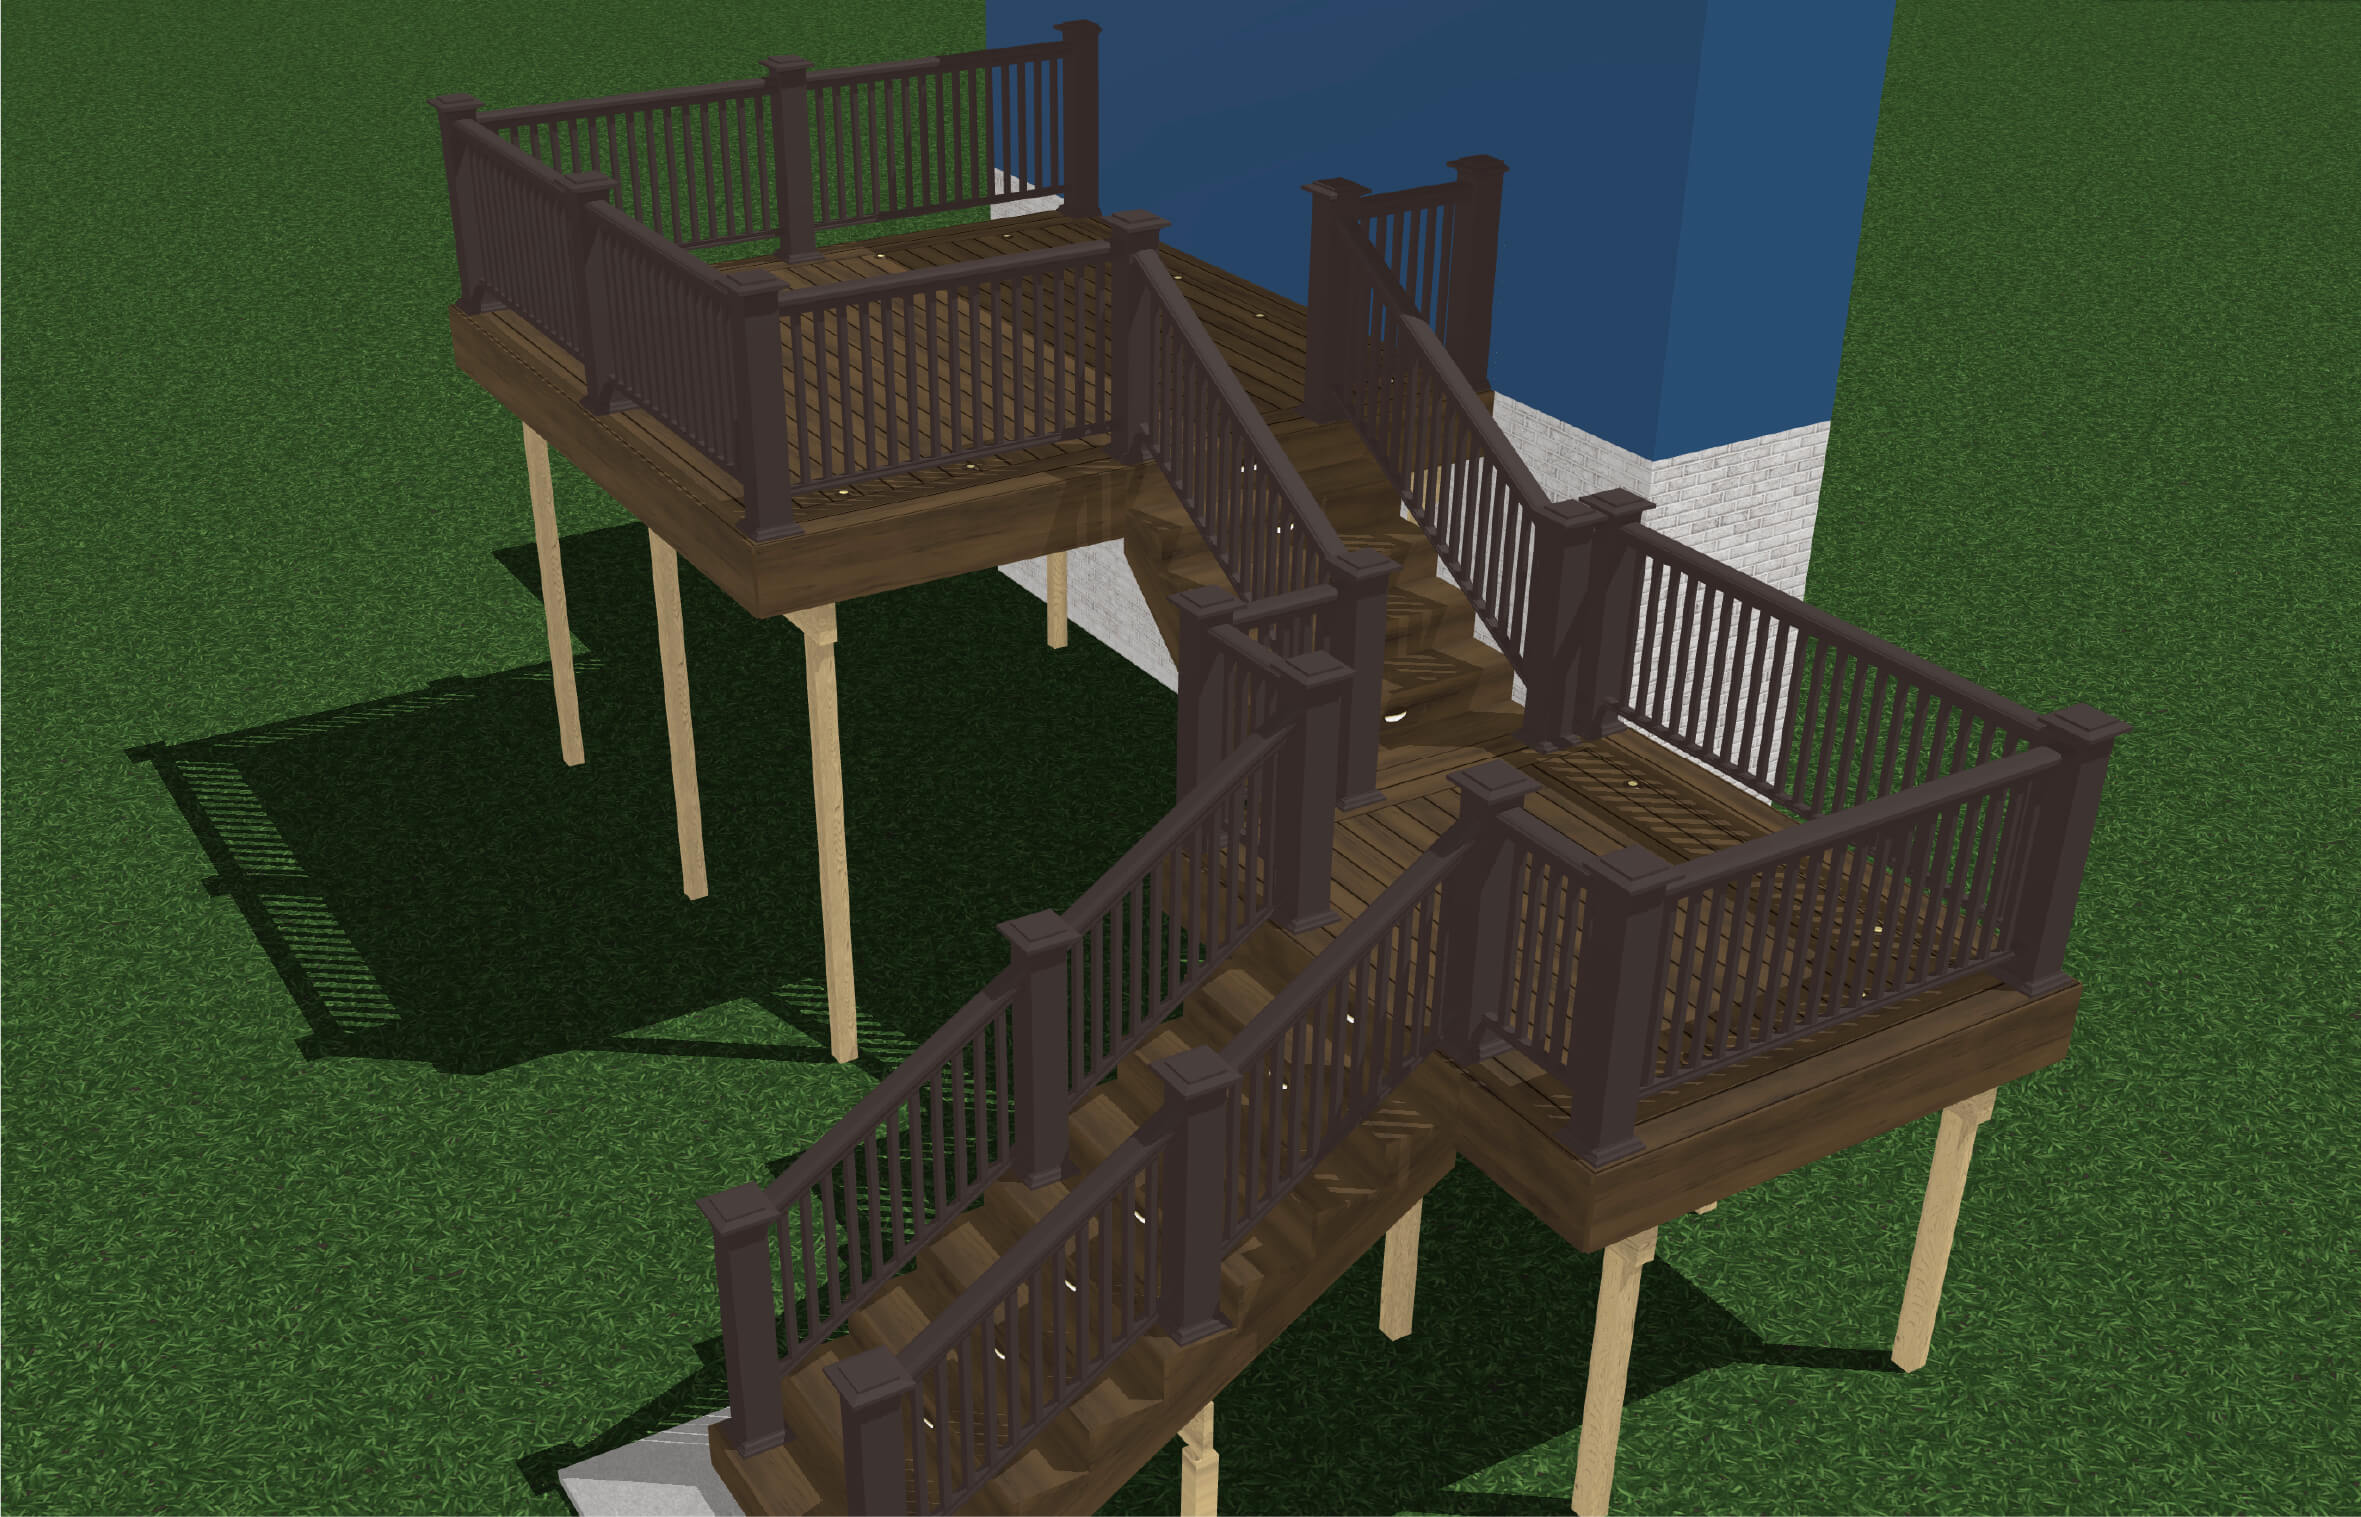 A 3D illustration of a multi-level deck, which are common choices for decks on a slope.